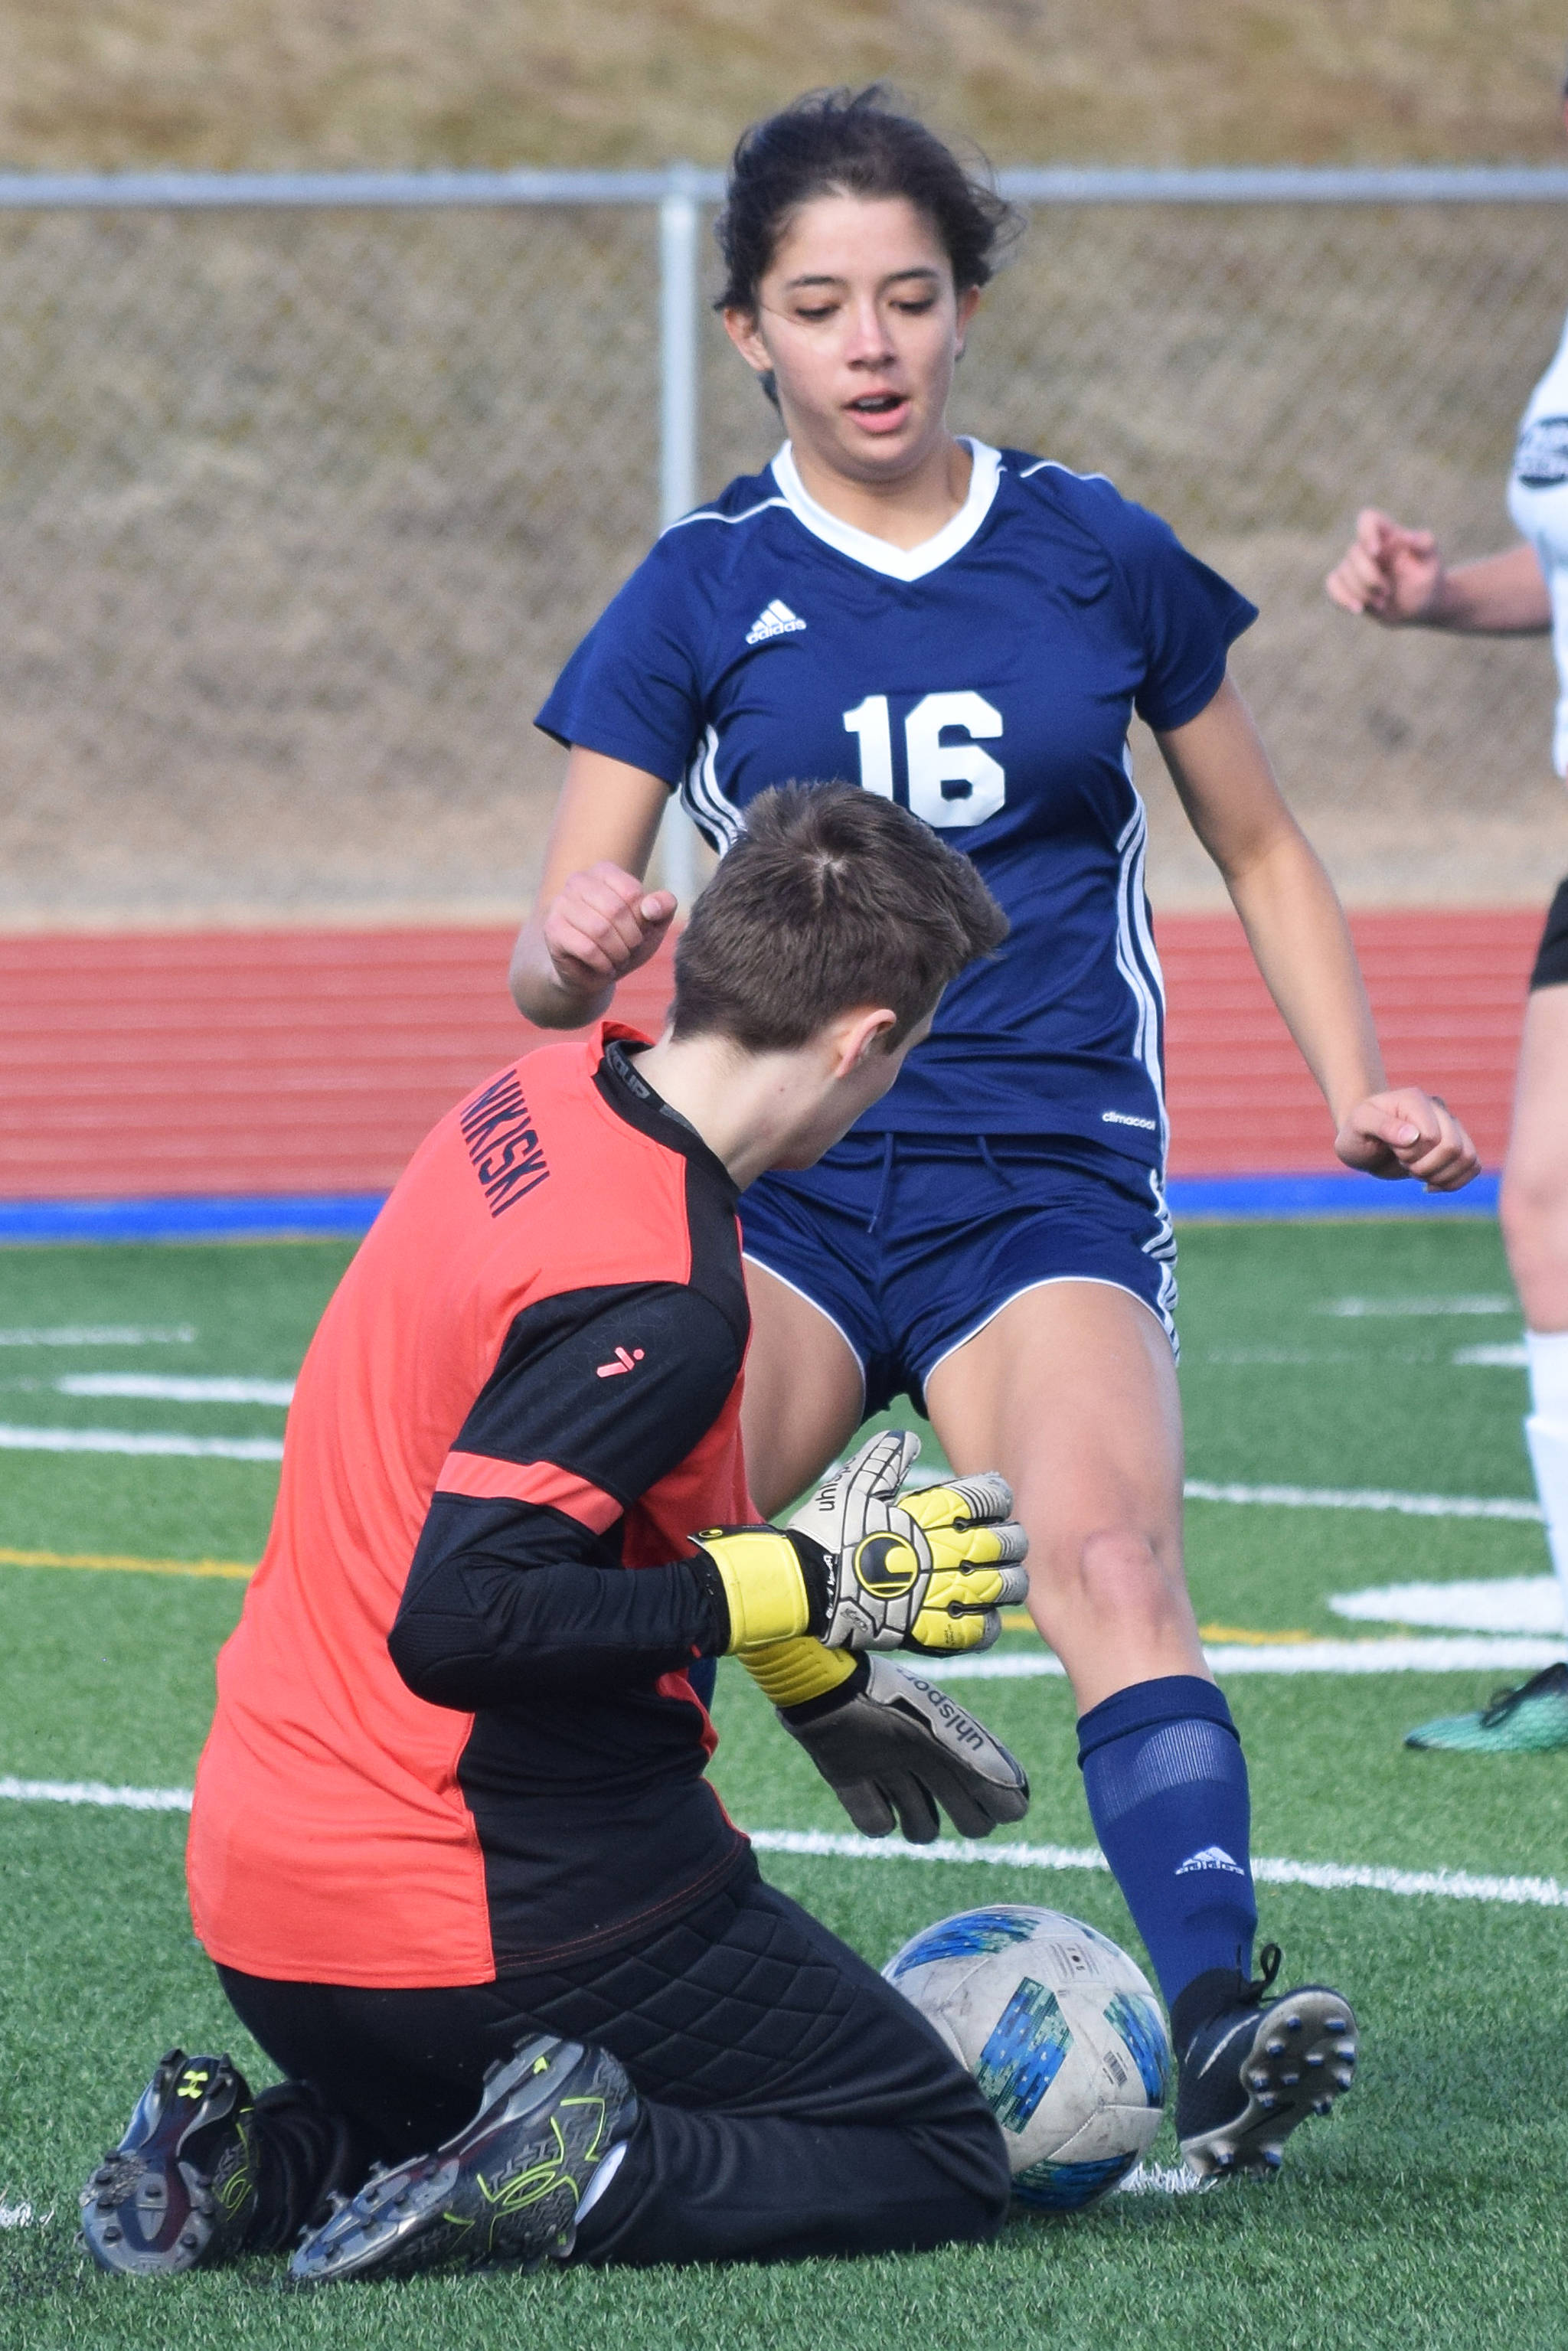 Nikiski goalkeeper Abby Bystedt dives for a save against Soldotna’s Sierra Kuntz (16) Tuesday in a Peninsula Conference game at Soldotna High School. (Photo by Joey Klecka/Peninsula Clarion)